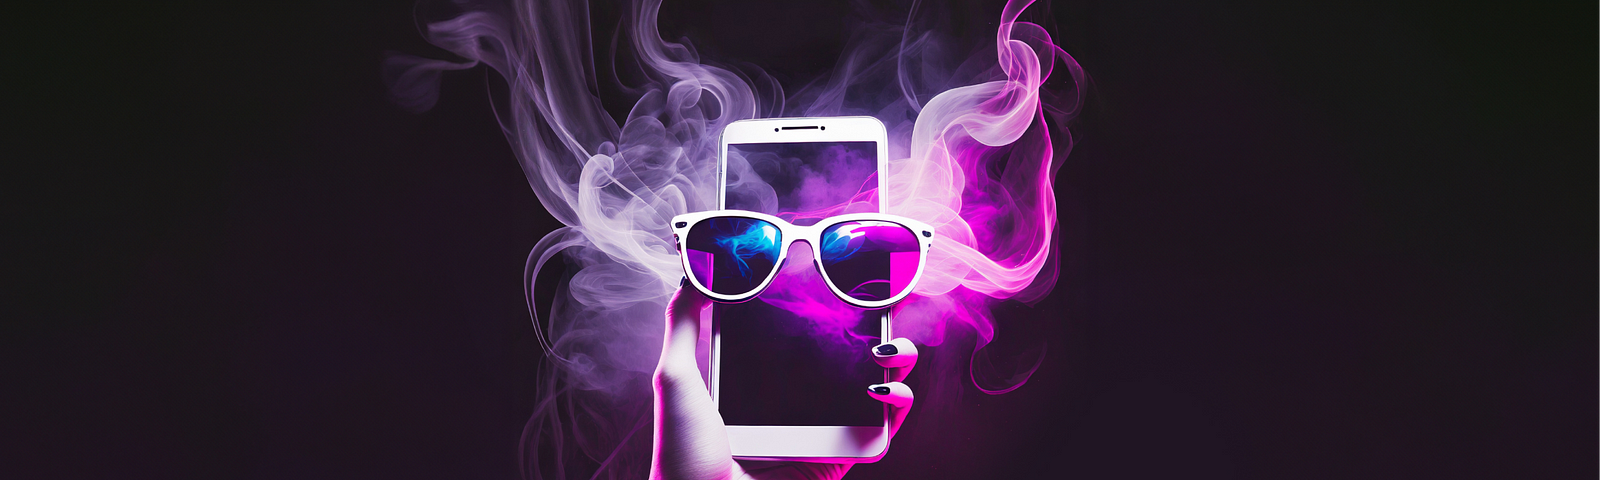 An ethereal concept image featuring a hand holding a smartphone materializing a pair of sunglasses in a cloud of purple and white smoke, highlighting Designhubz’s AR technology for a futuristic virtual try-on experience.